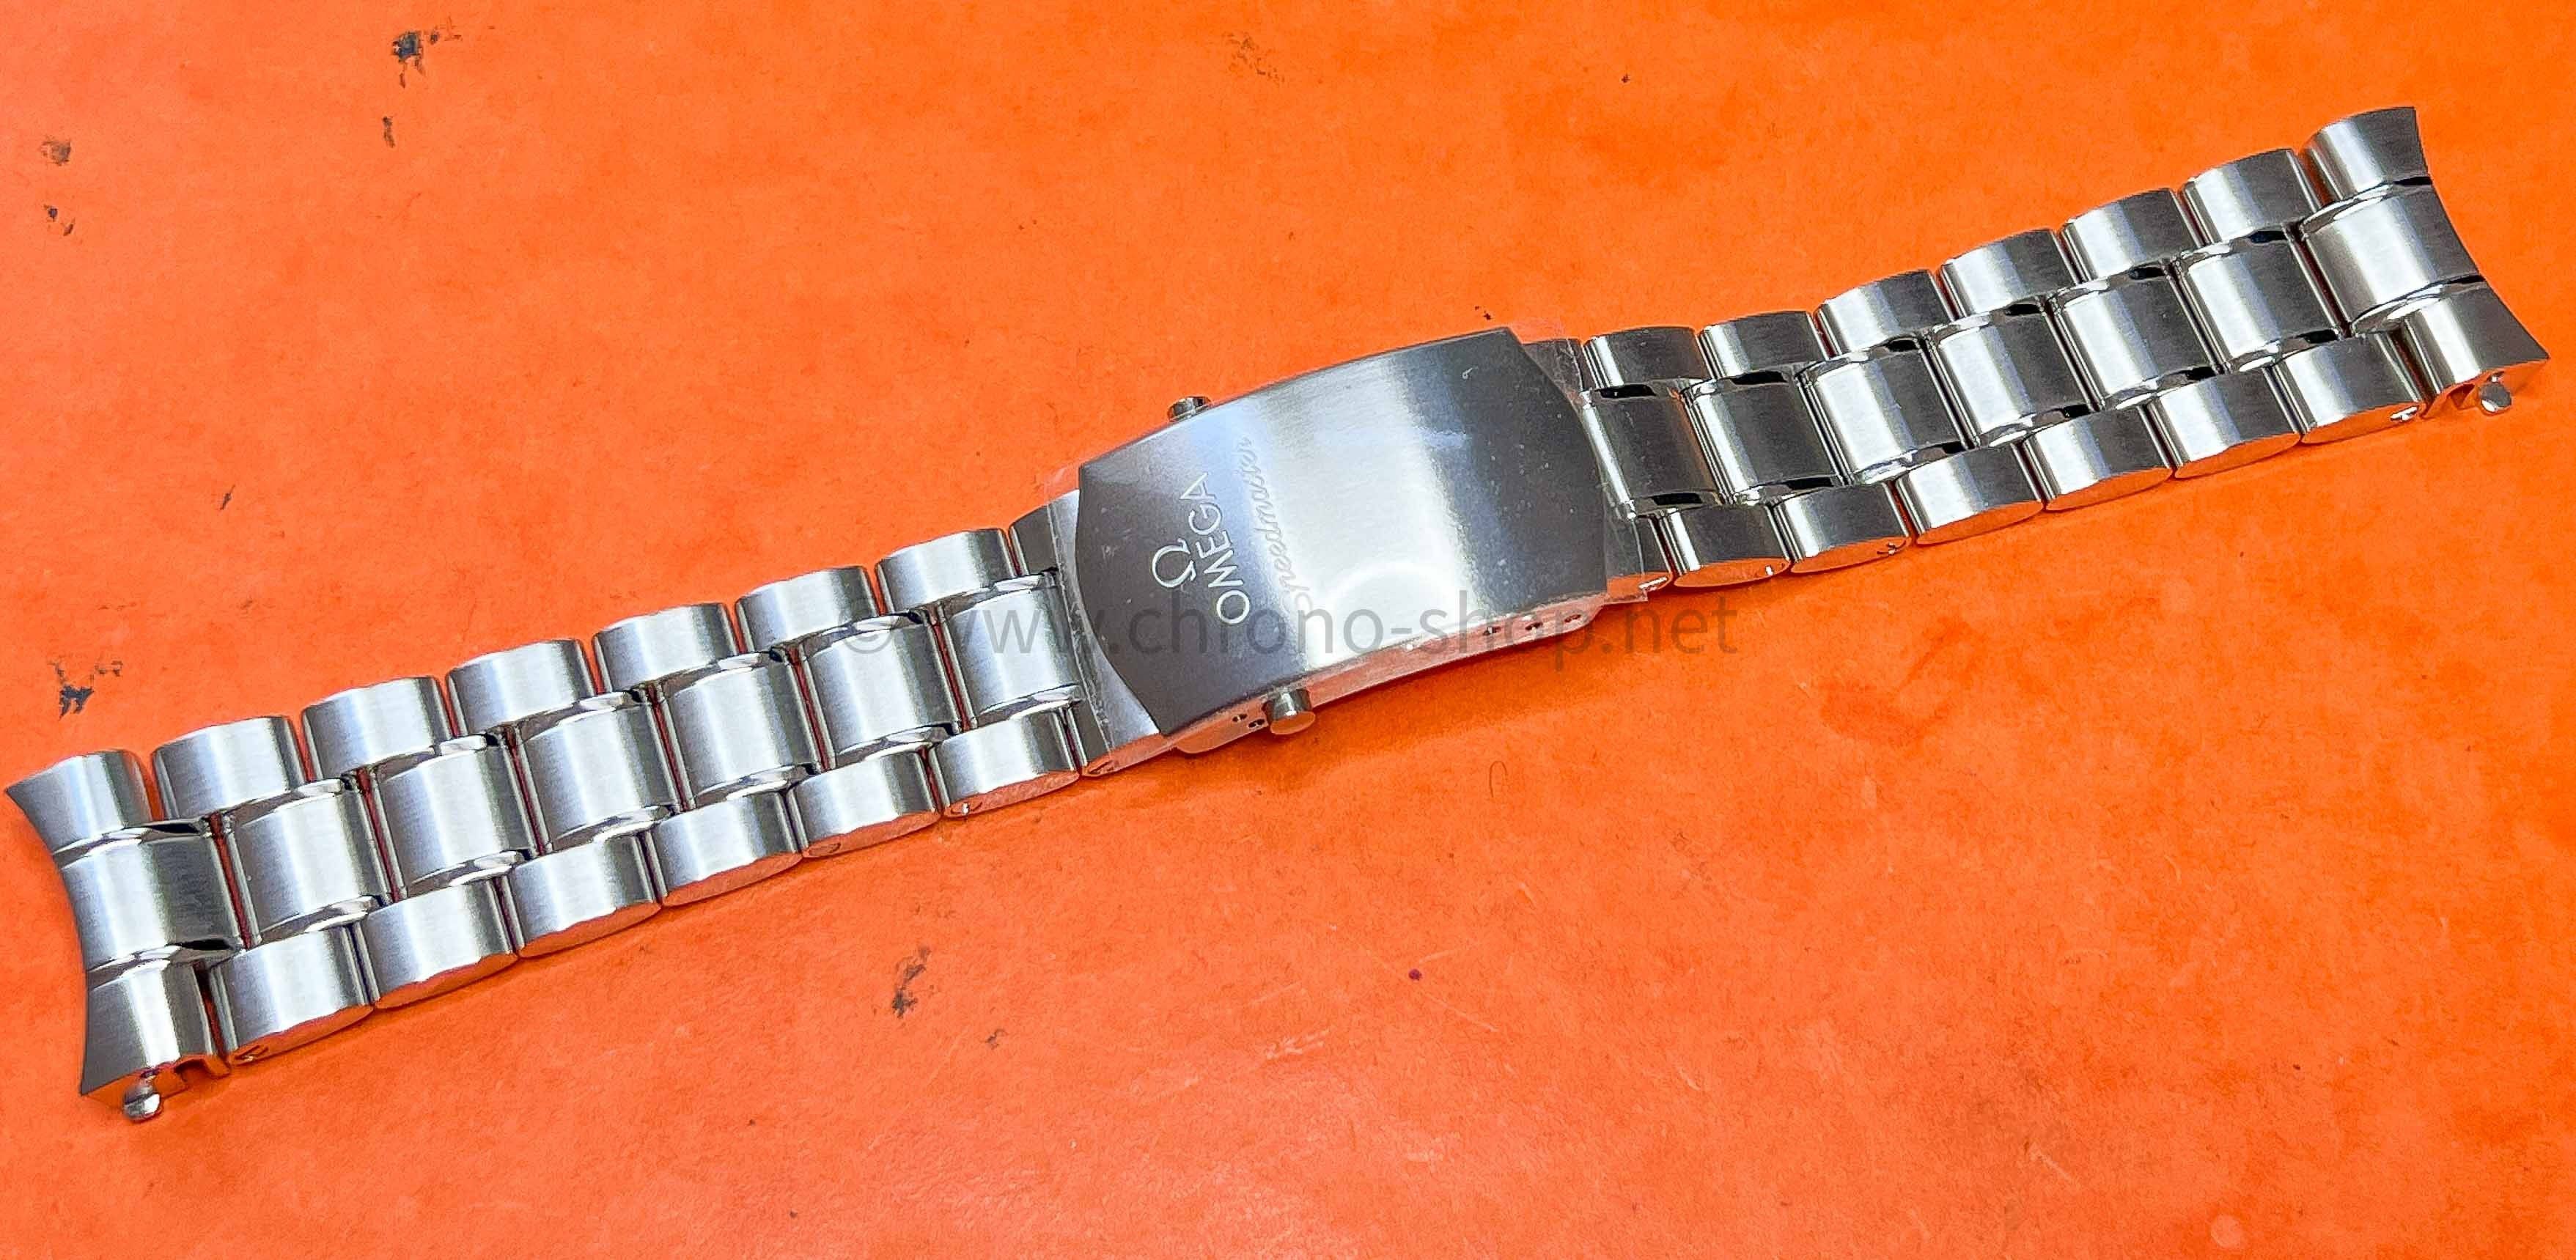 Omega Seamaster LCD - stainless steel - Bracelet stainless steel - 37 x  36mm - very good - vintage - 10000072046 - English | Watch.de